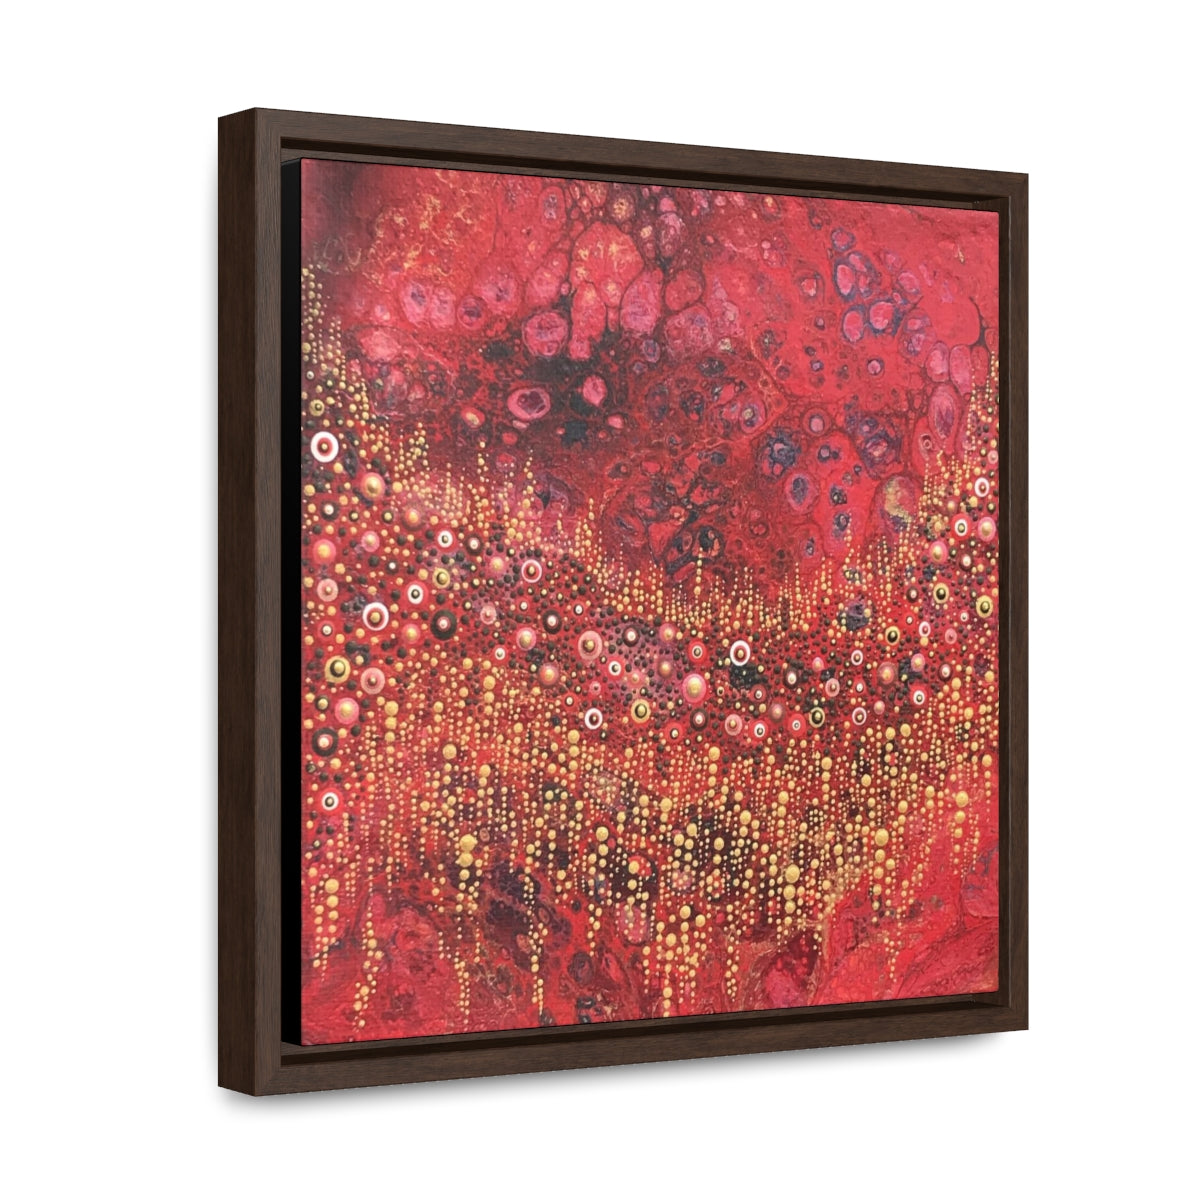 One More Red Nightmare Original Print Gallery Canvas Wraps, Square Frame